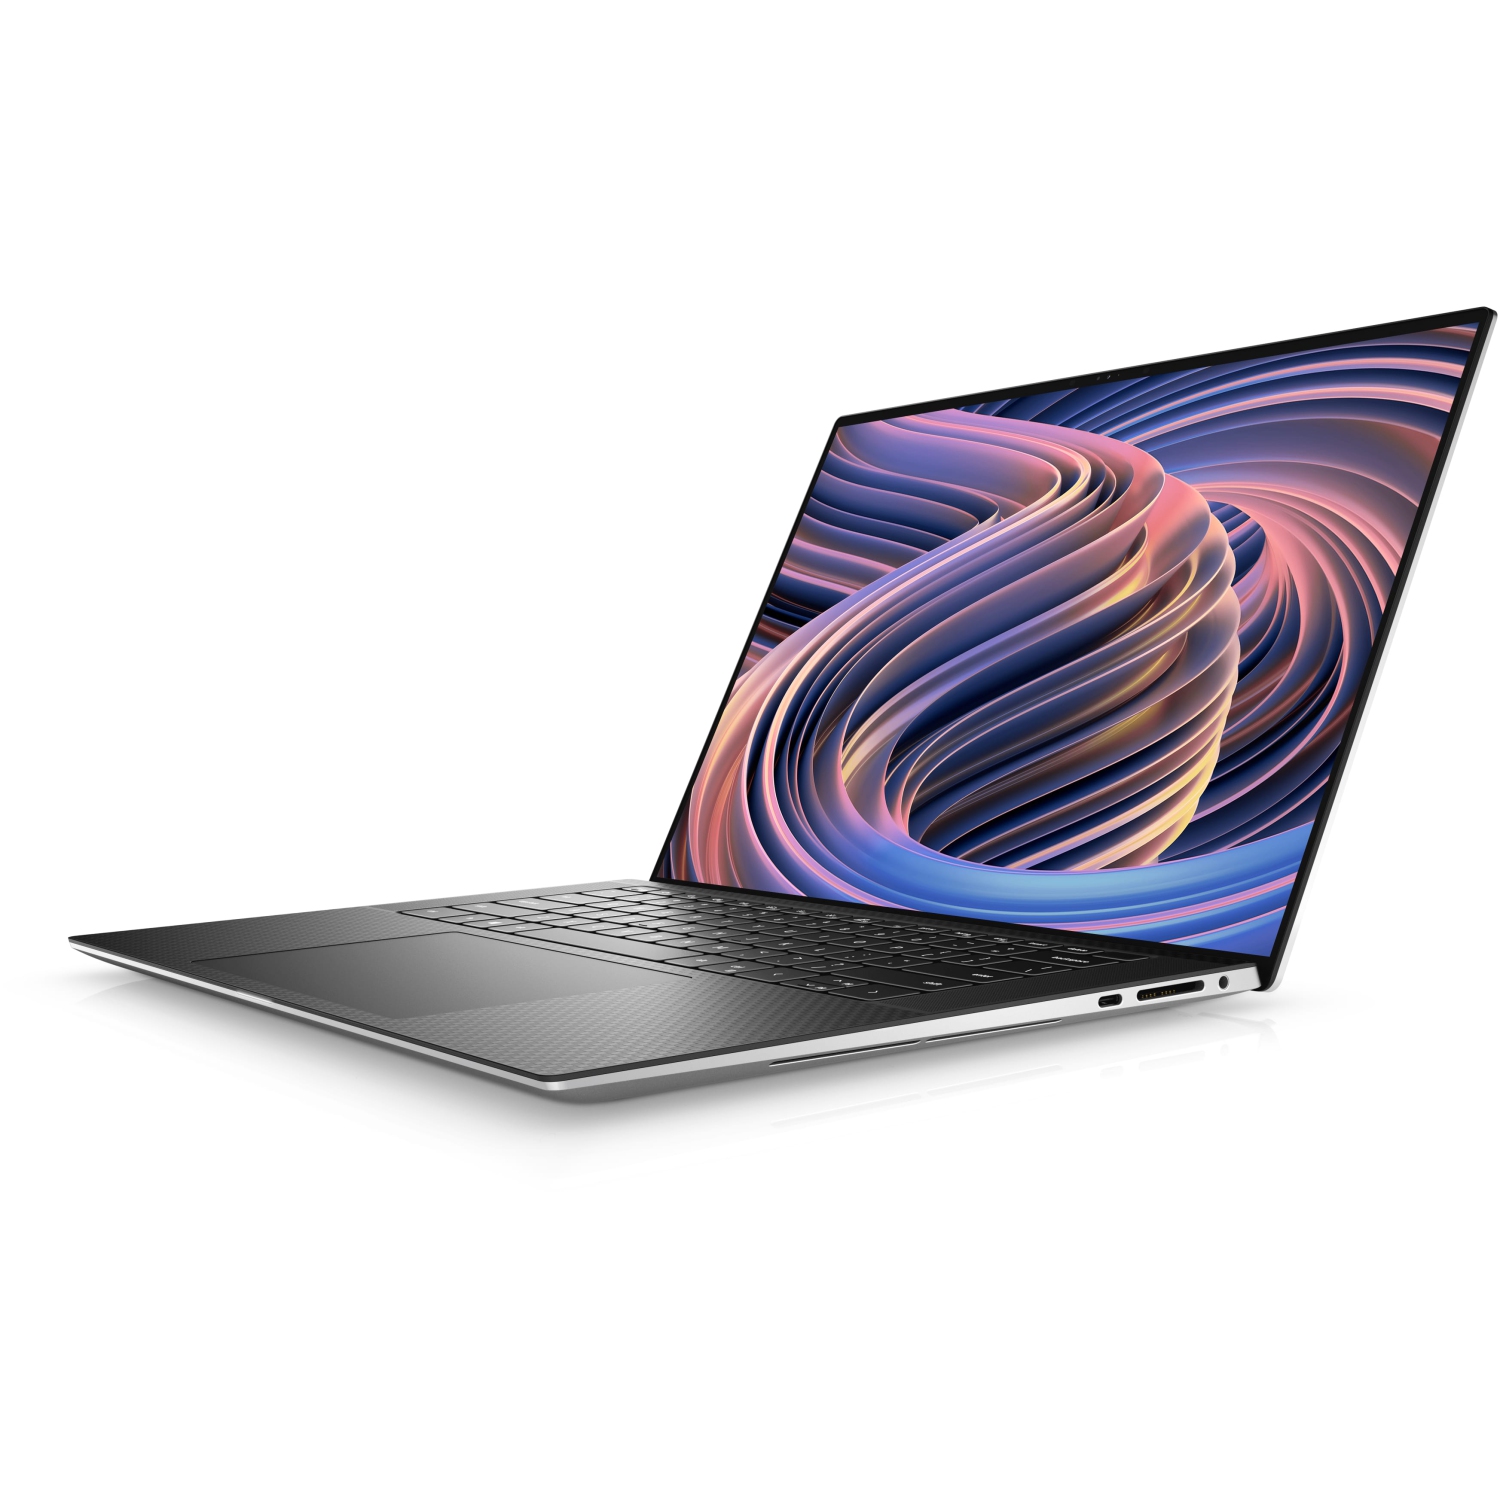 Refurbished (Excellent) – Dell XPS 9520 Laptop (2022) | 15.6" FHD+ | Core i7 - 512GB SSD - 32GB RAM - RTX 3050 | 14 Cores @ 4.7 GHz - 12th Gen CPU